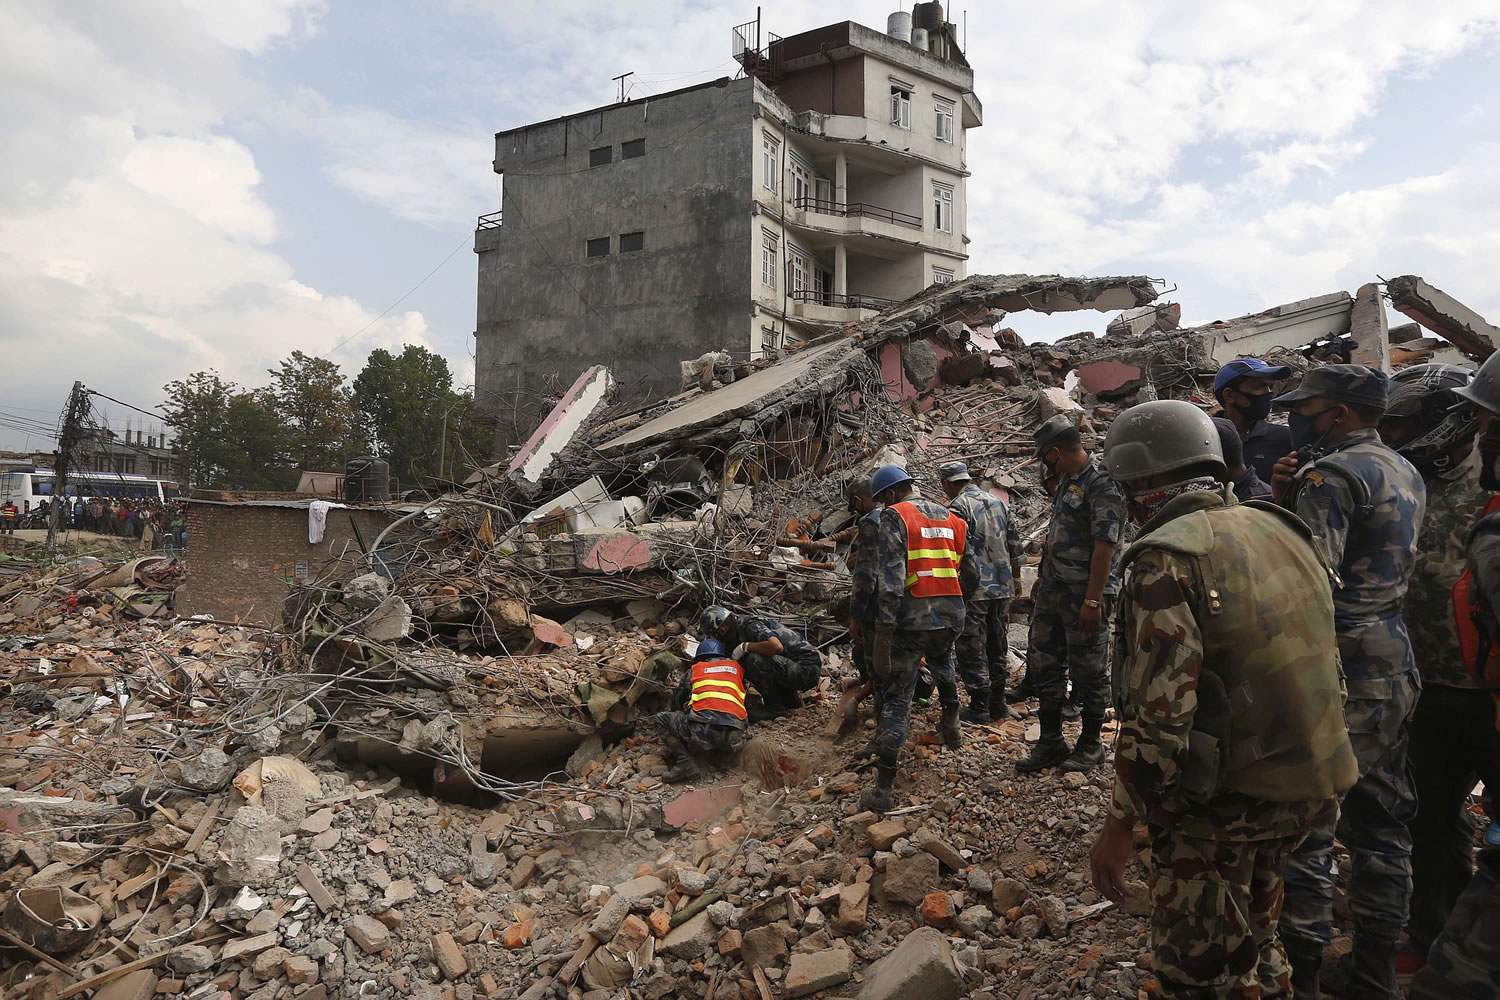 Nepalese policemen look for survivors Sunday in the debris of a building that collapsed in an earthquake in Kathmandu, Nepal, on Saturday.